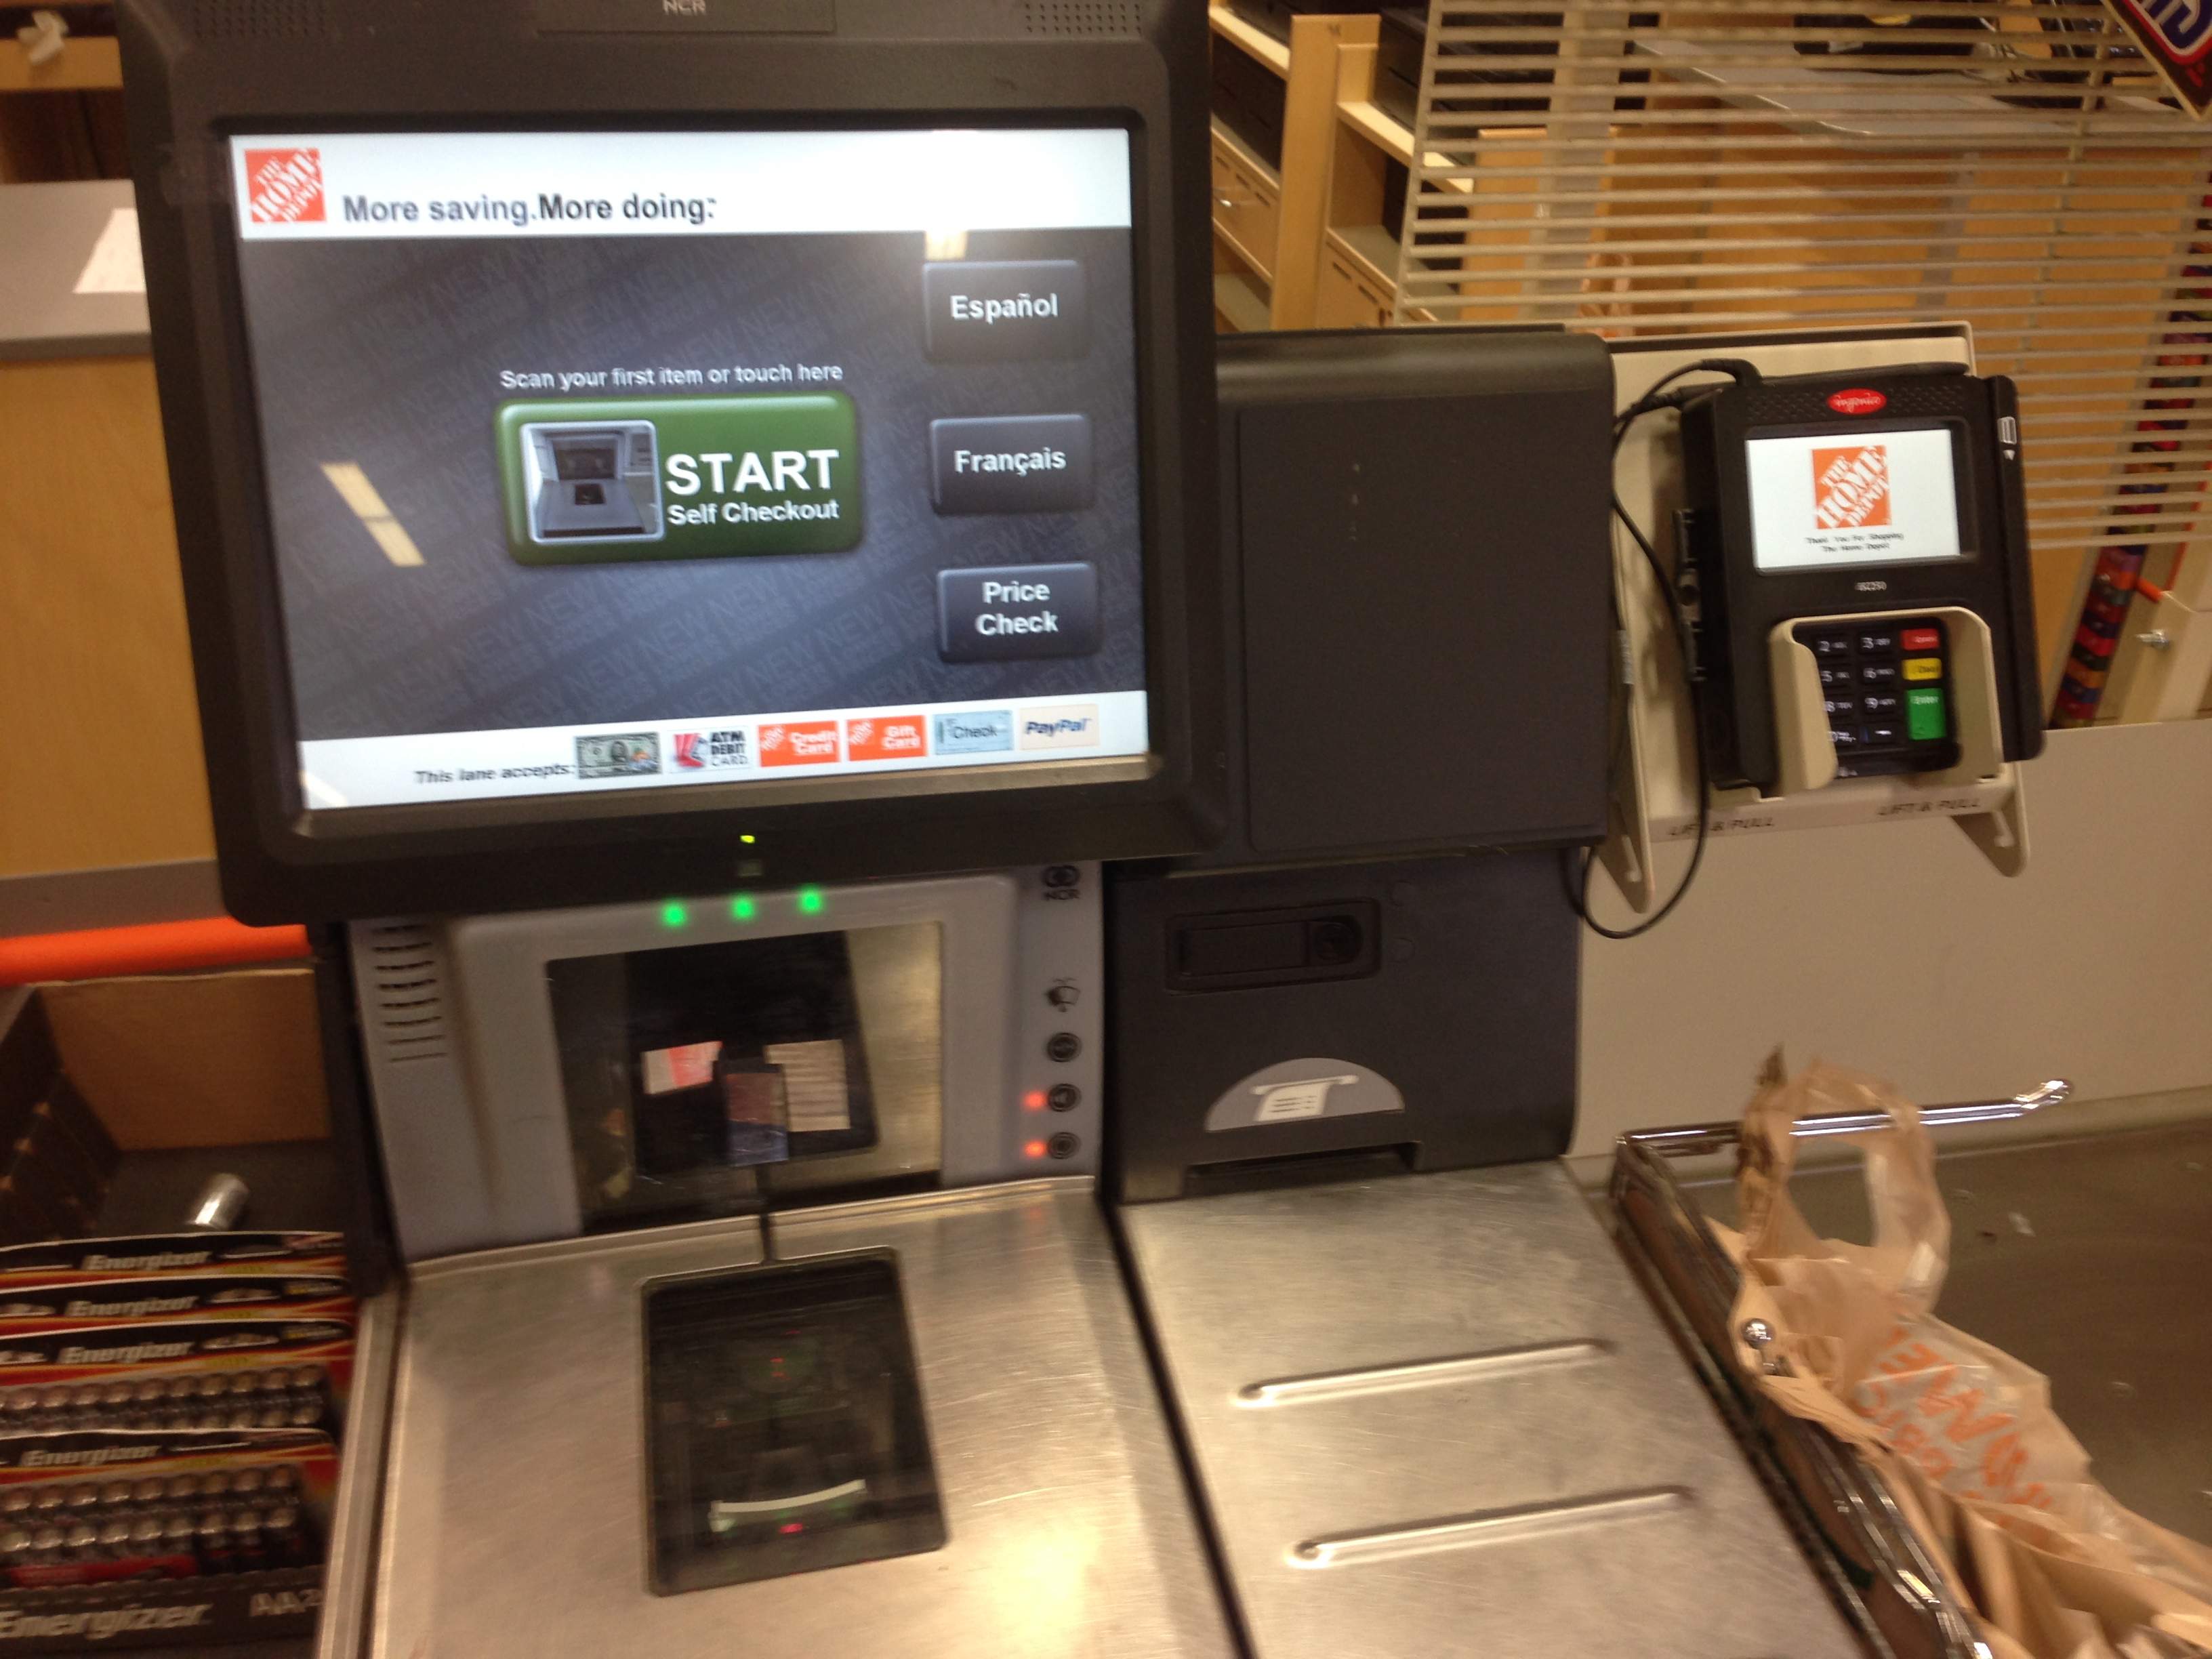 In Home Depot Breach, Investigation Focuses on Self-Checkout Lanes ...